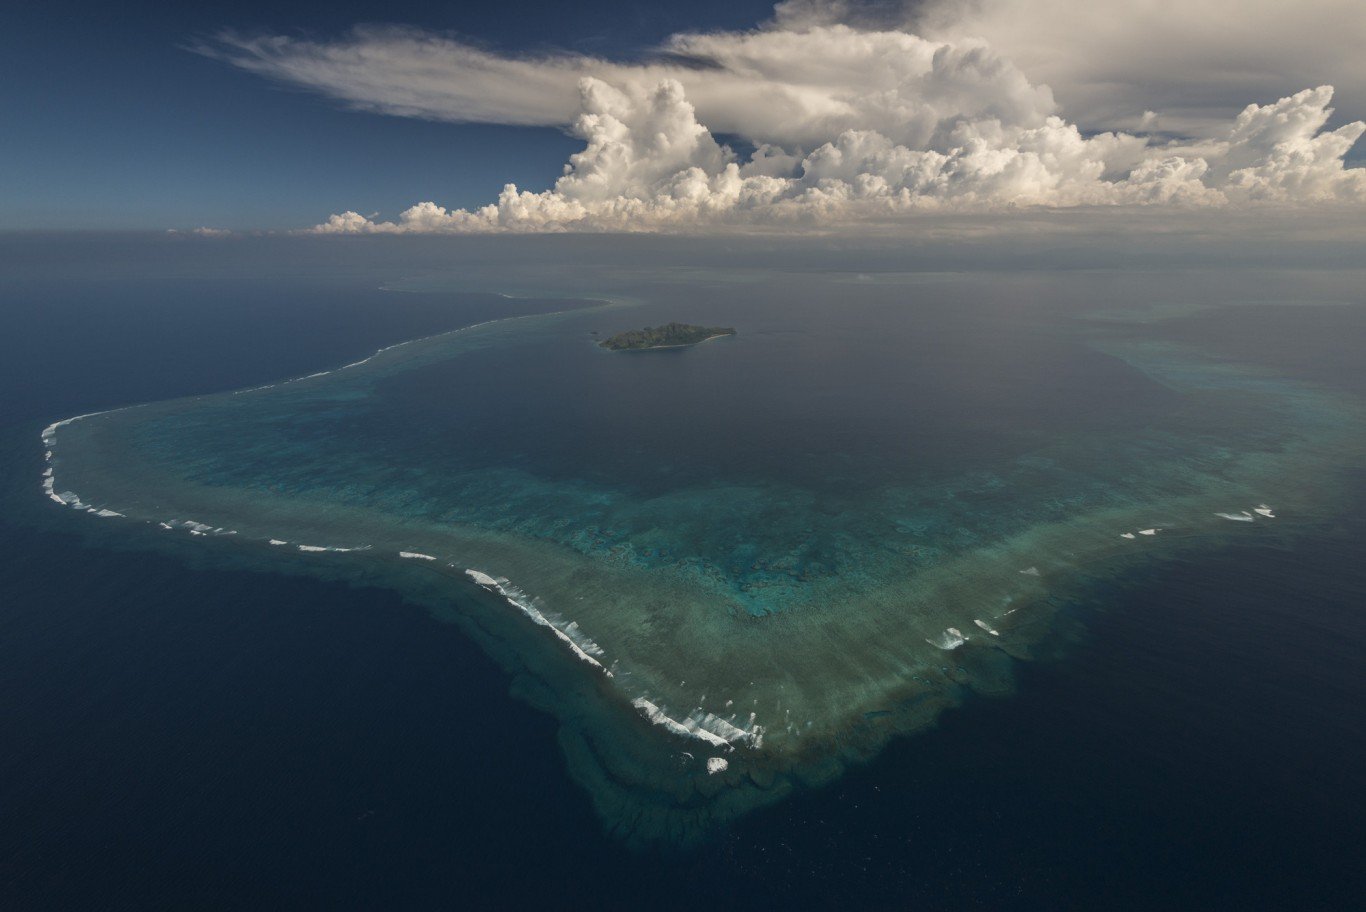 The $800 million potential of Fiji's reef